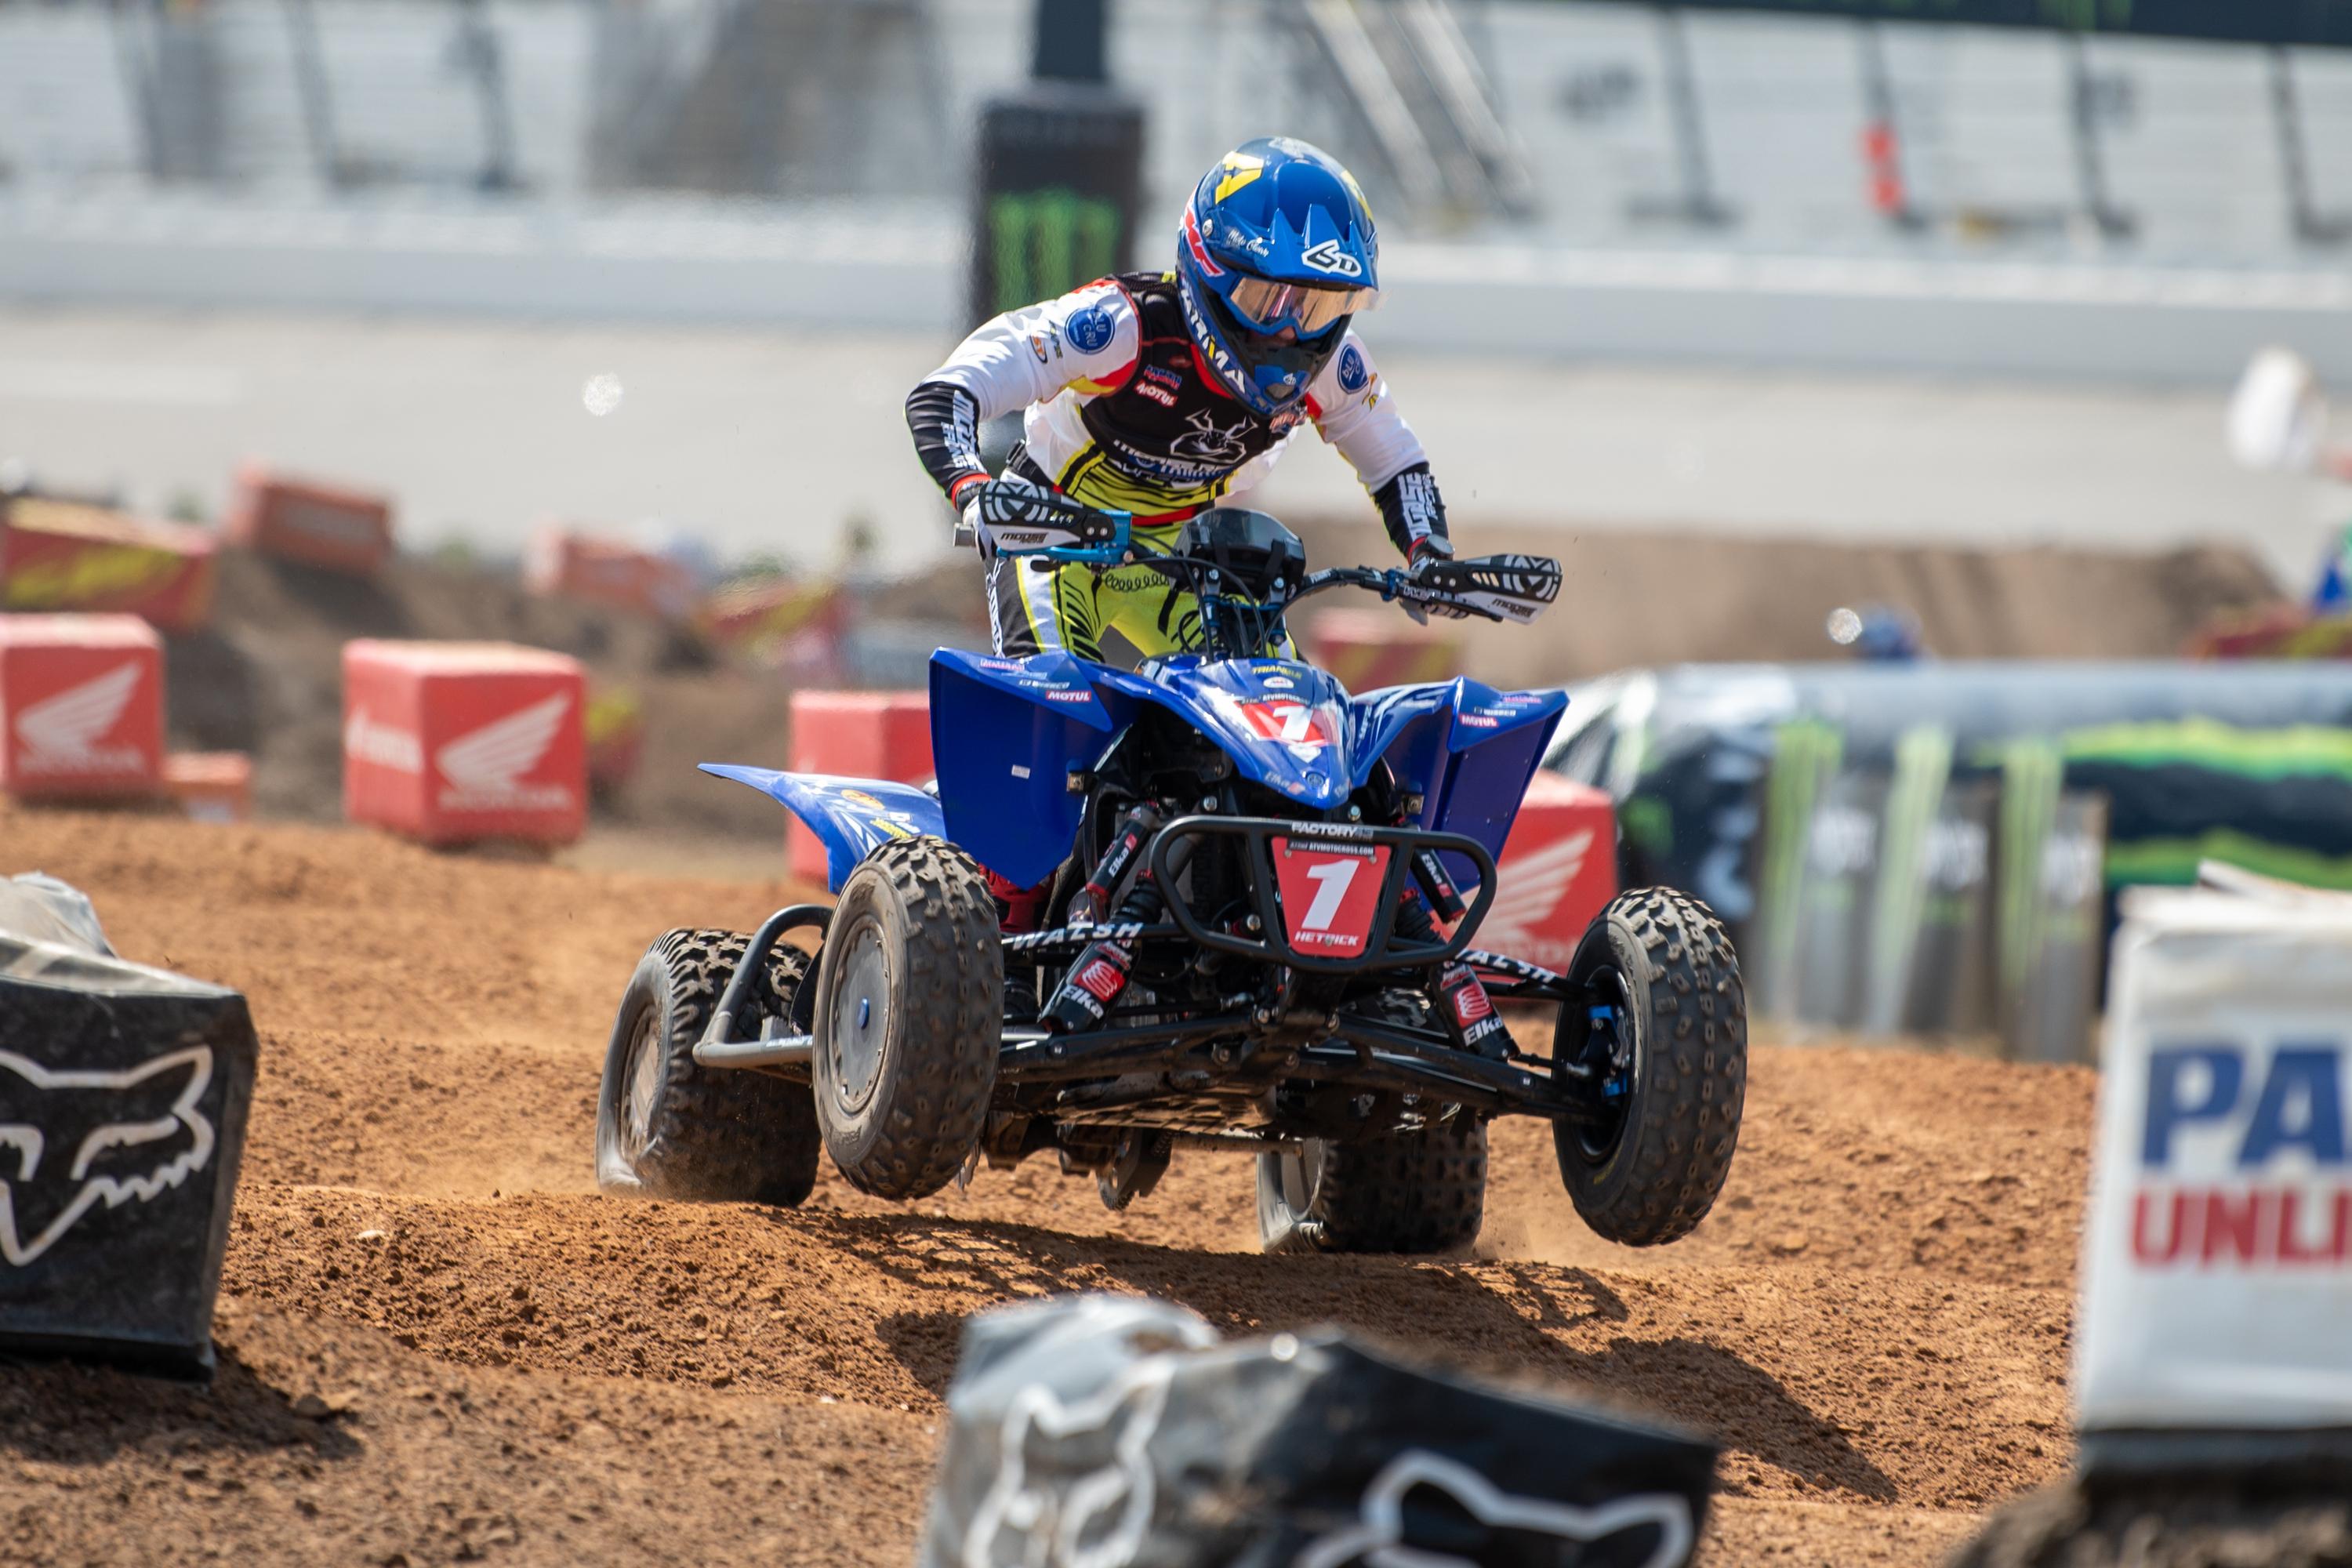 ATV Motocross National Championship Heads to Gatorback This Weekend